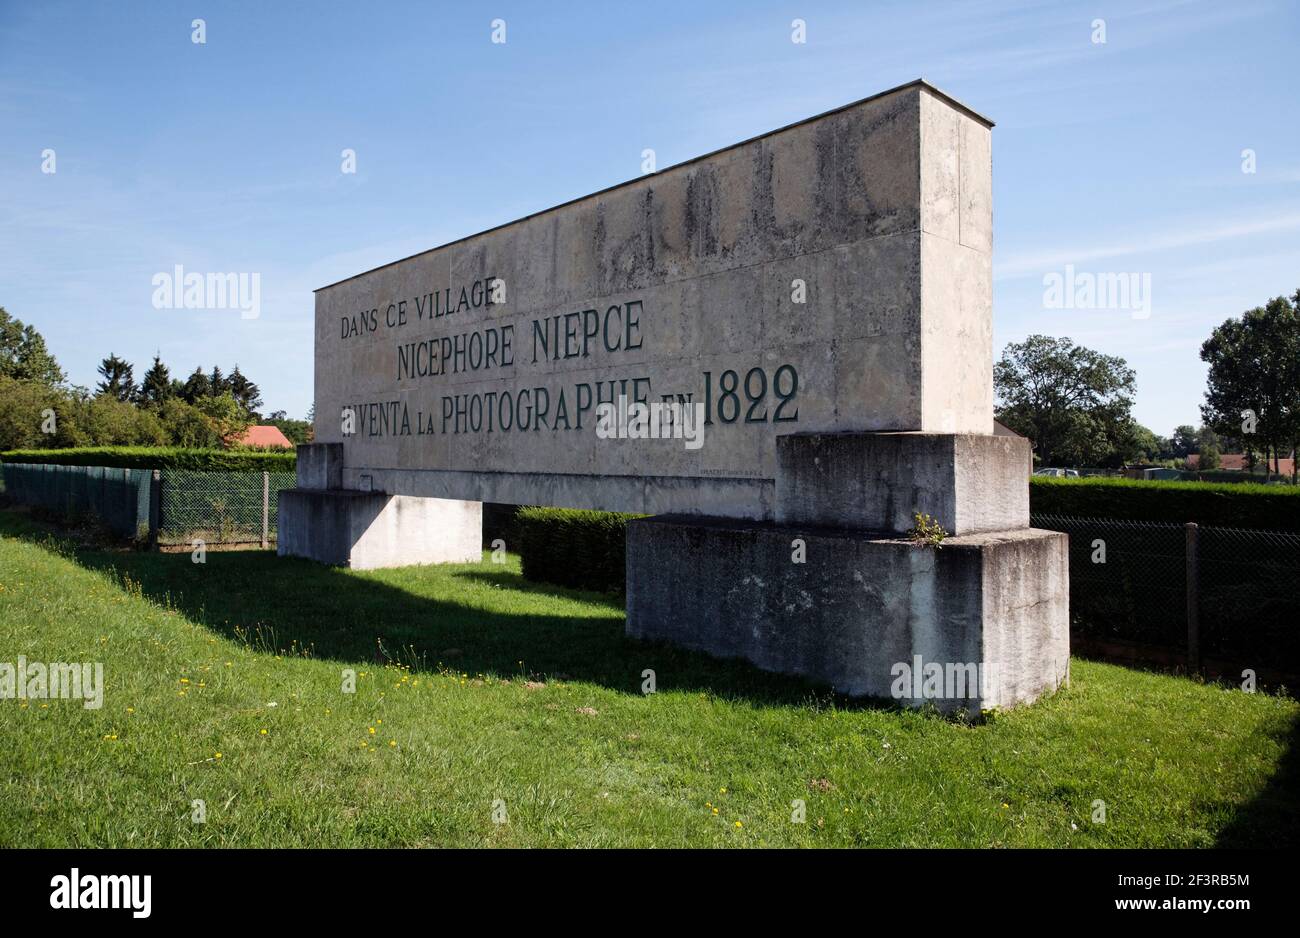 Monument to Joseph Nicephore Niepce, inventor of photography, where first photograph taken in 1826 using helio discography, Saint-Loup-de-Varennes, Ch Stock Photo